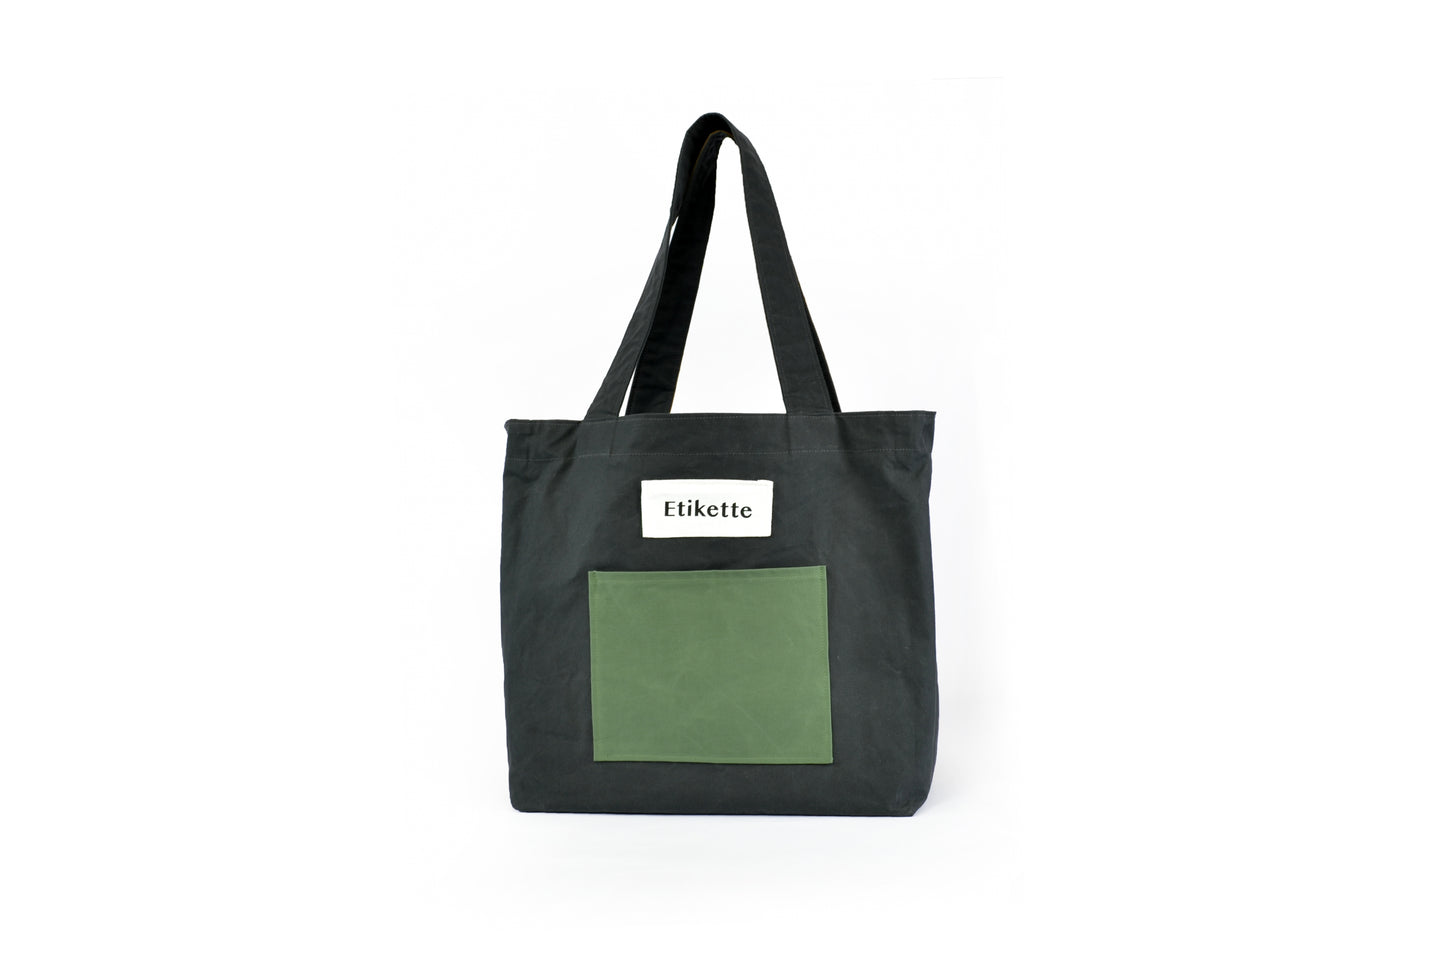 The Commuter Tote Bag